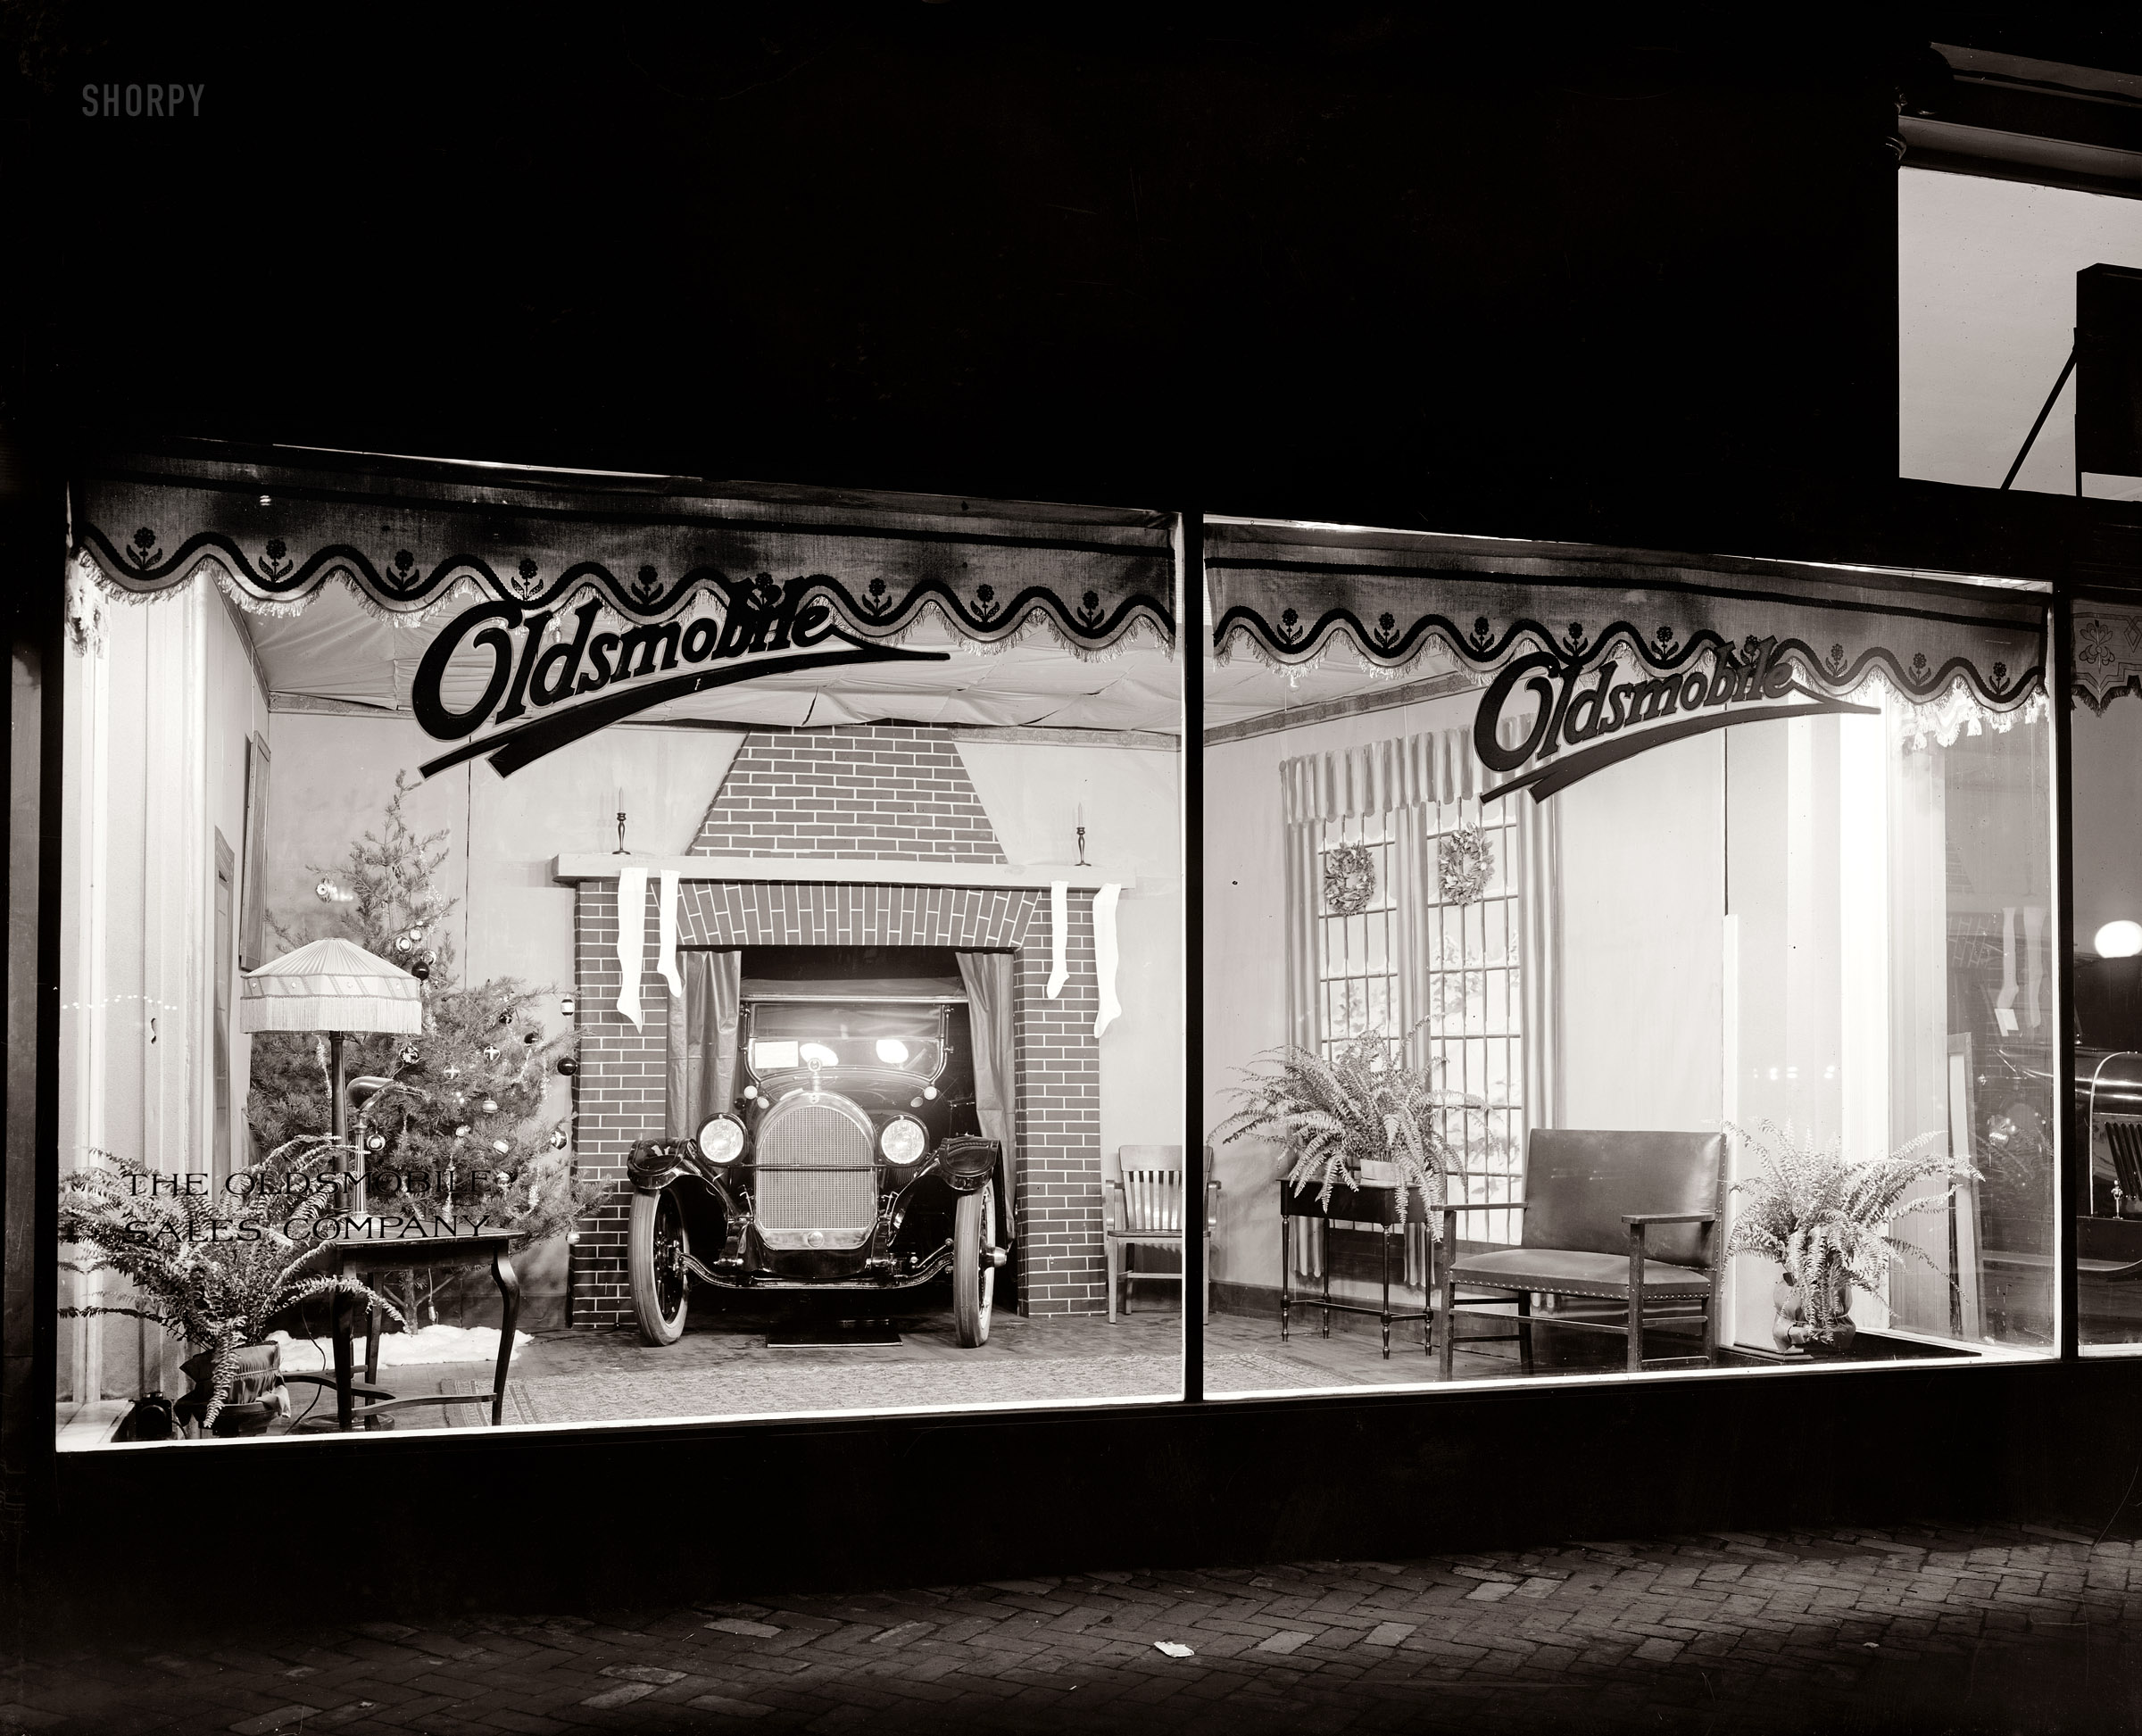 Washington, D.C., circa 1922. "Oldsmobile sales window." Some of us beyond a certain age might remember the Oldsmobile, or even have driven or owned one. National Photo Company Collection glass negative. View full size.